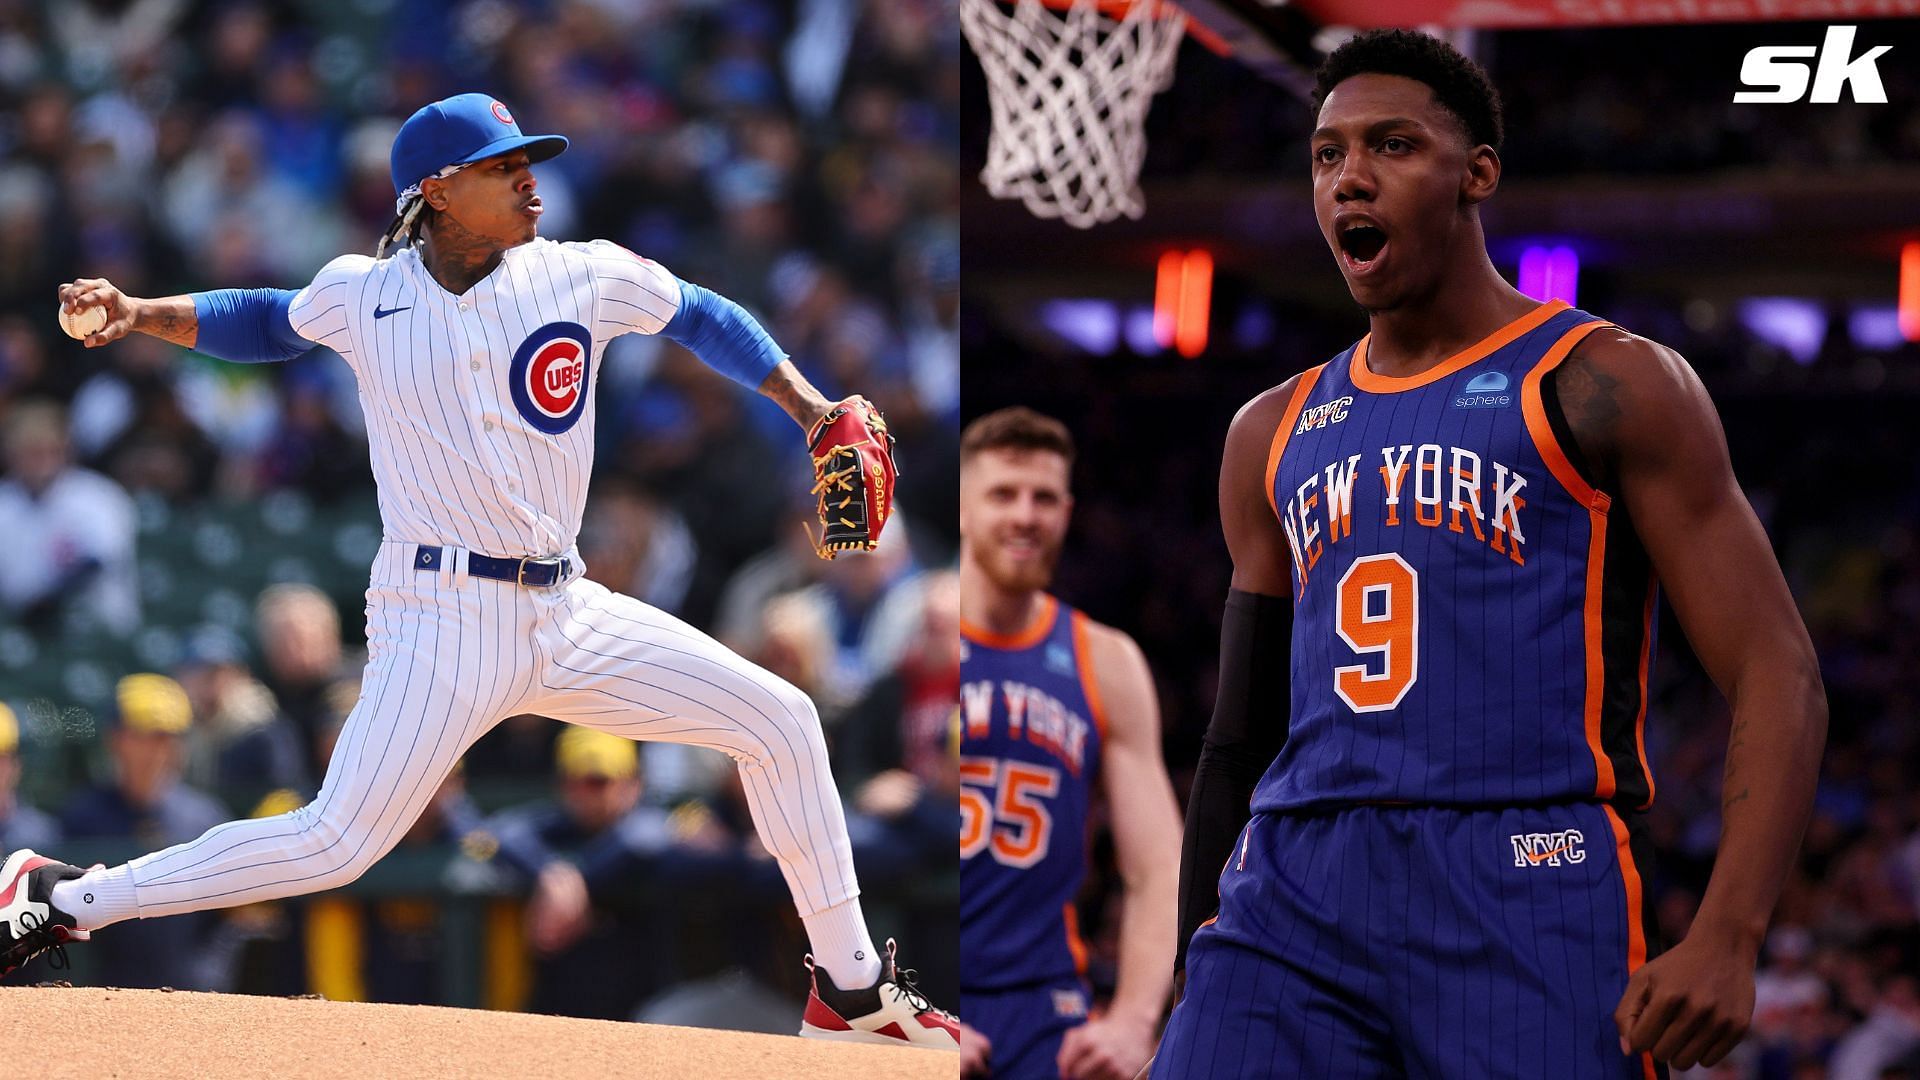 Yankees fans react as Marcus Stroman gets spotted at the Knicks game